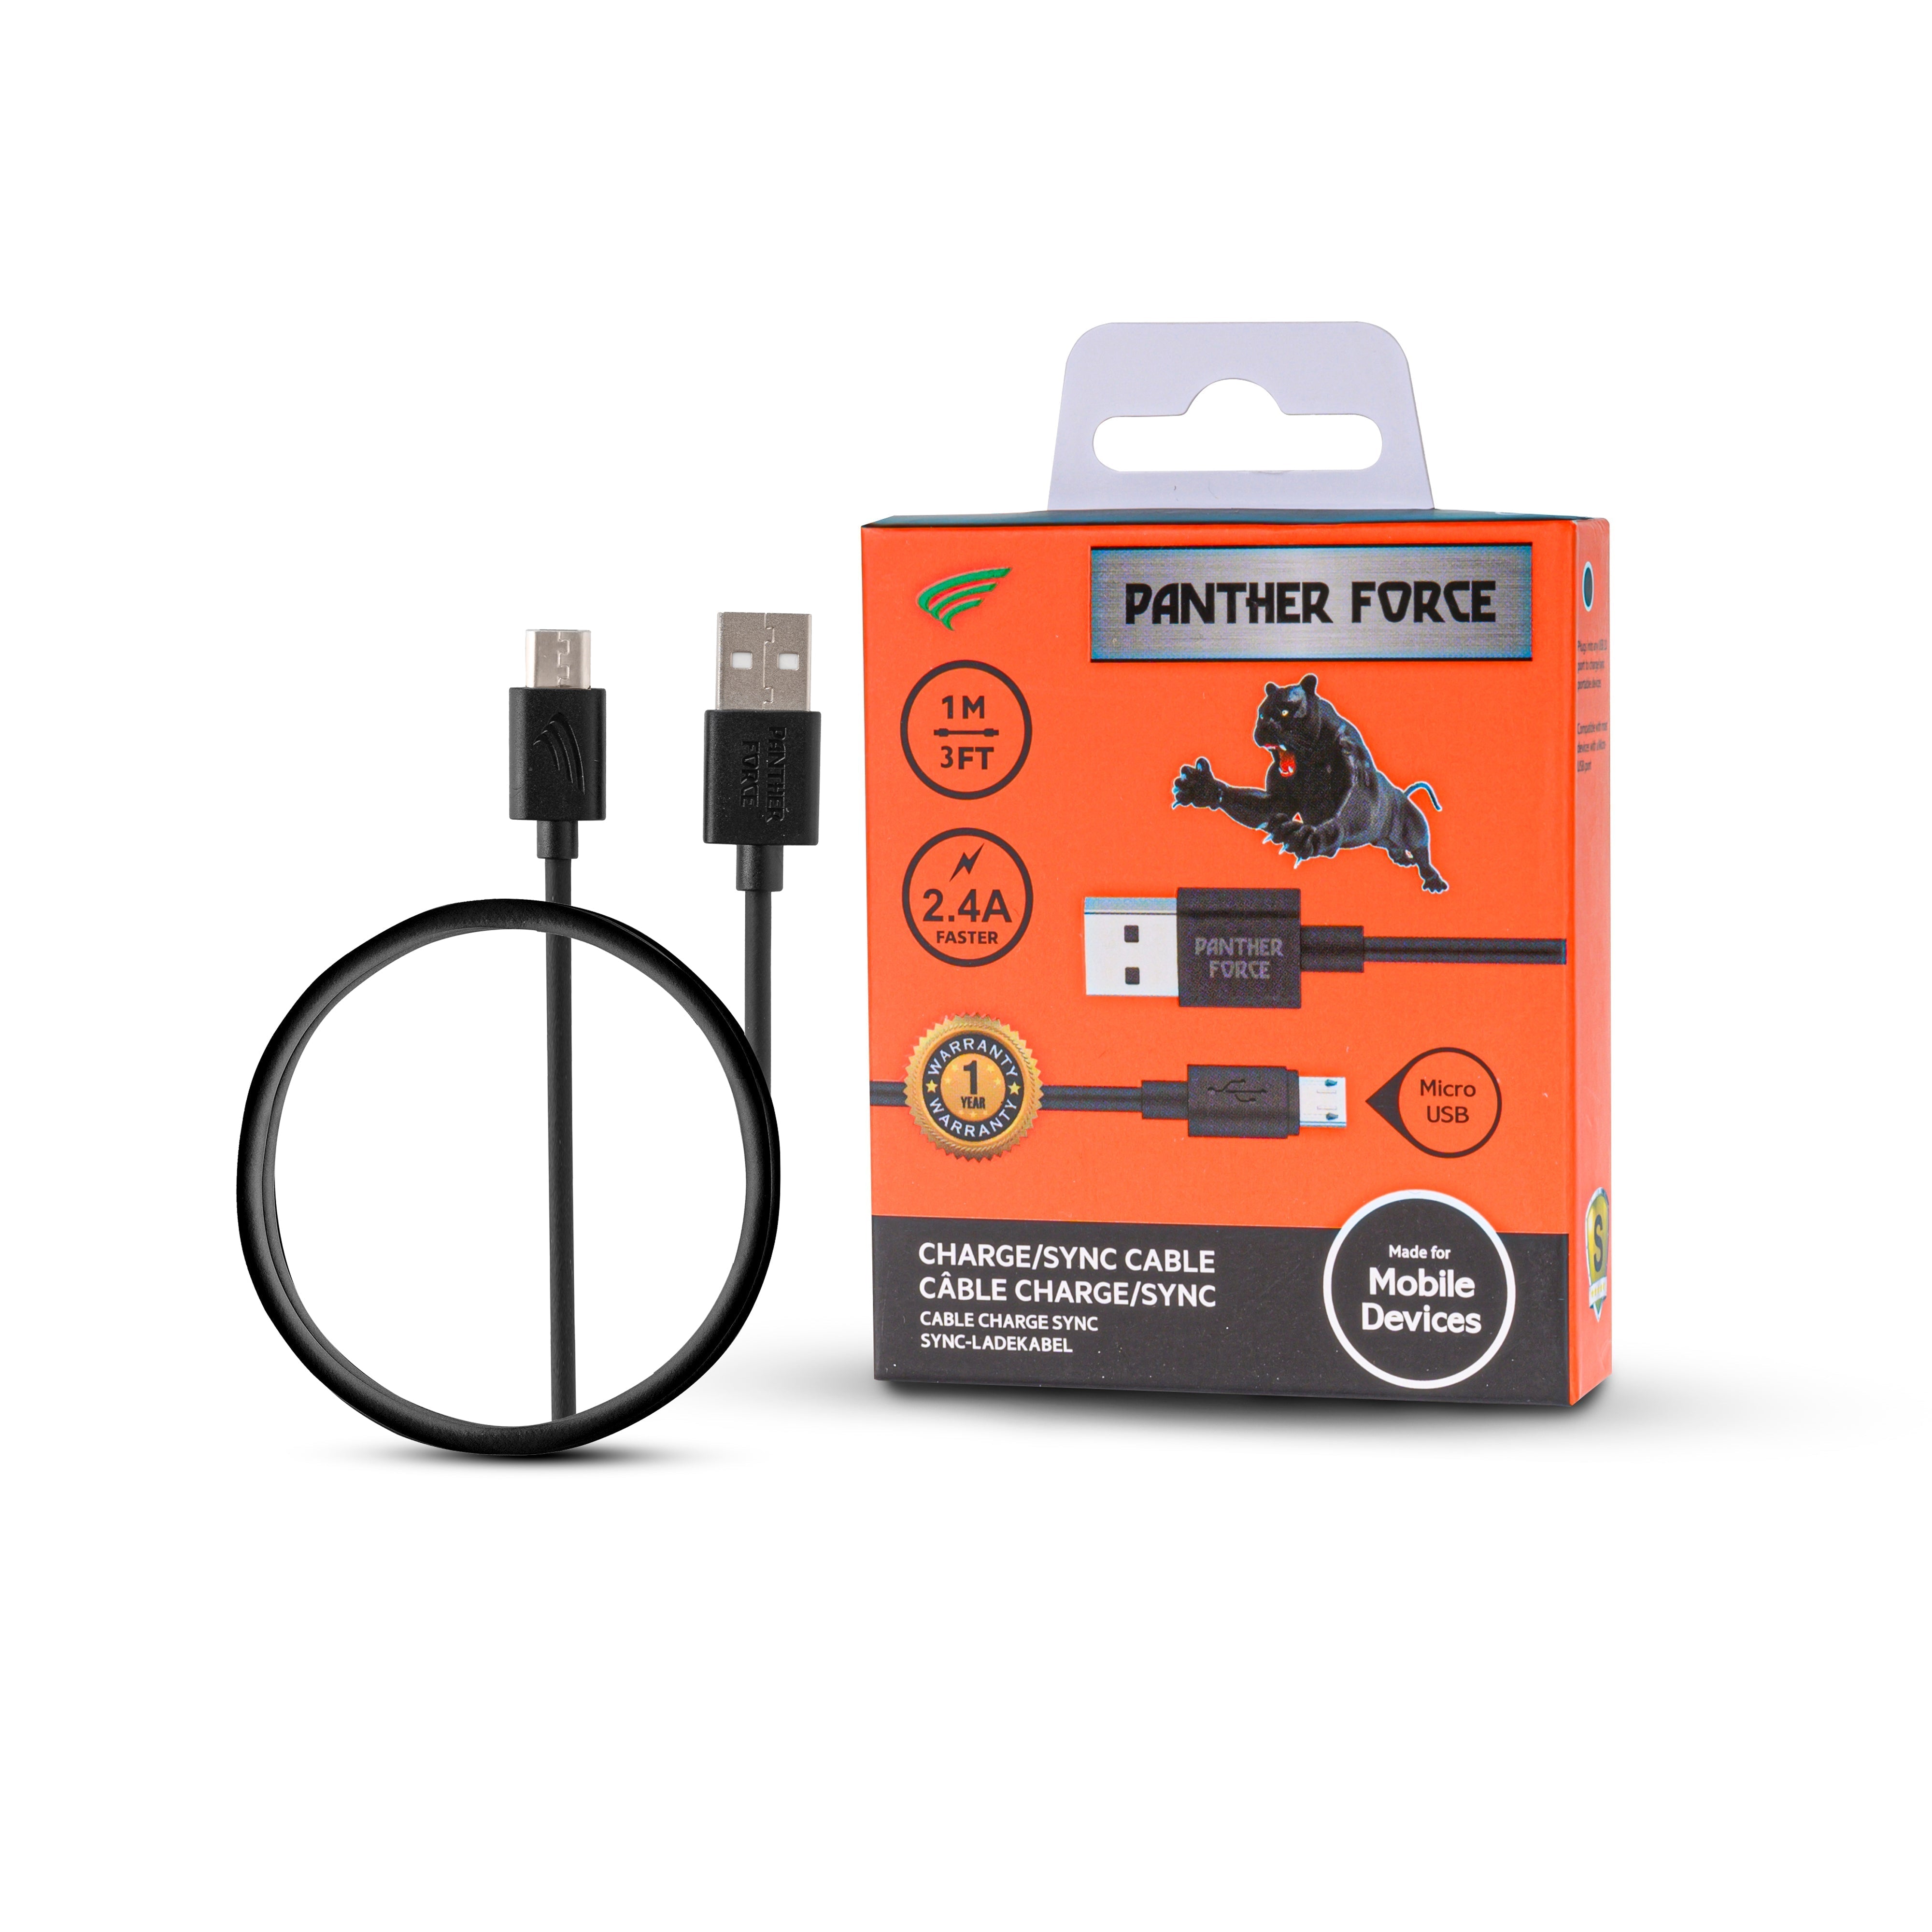 1M USB TO MICRO CABLE-2.4AMP